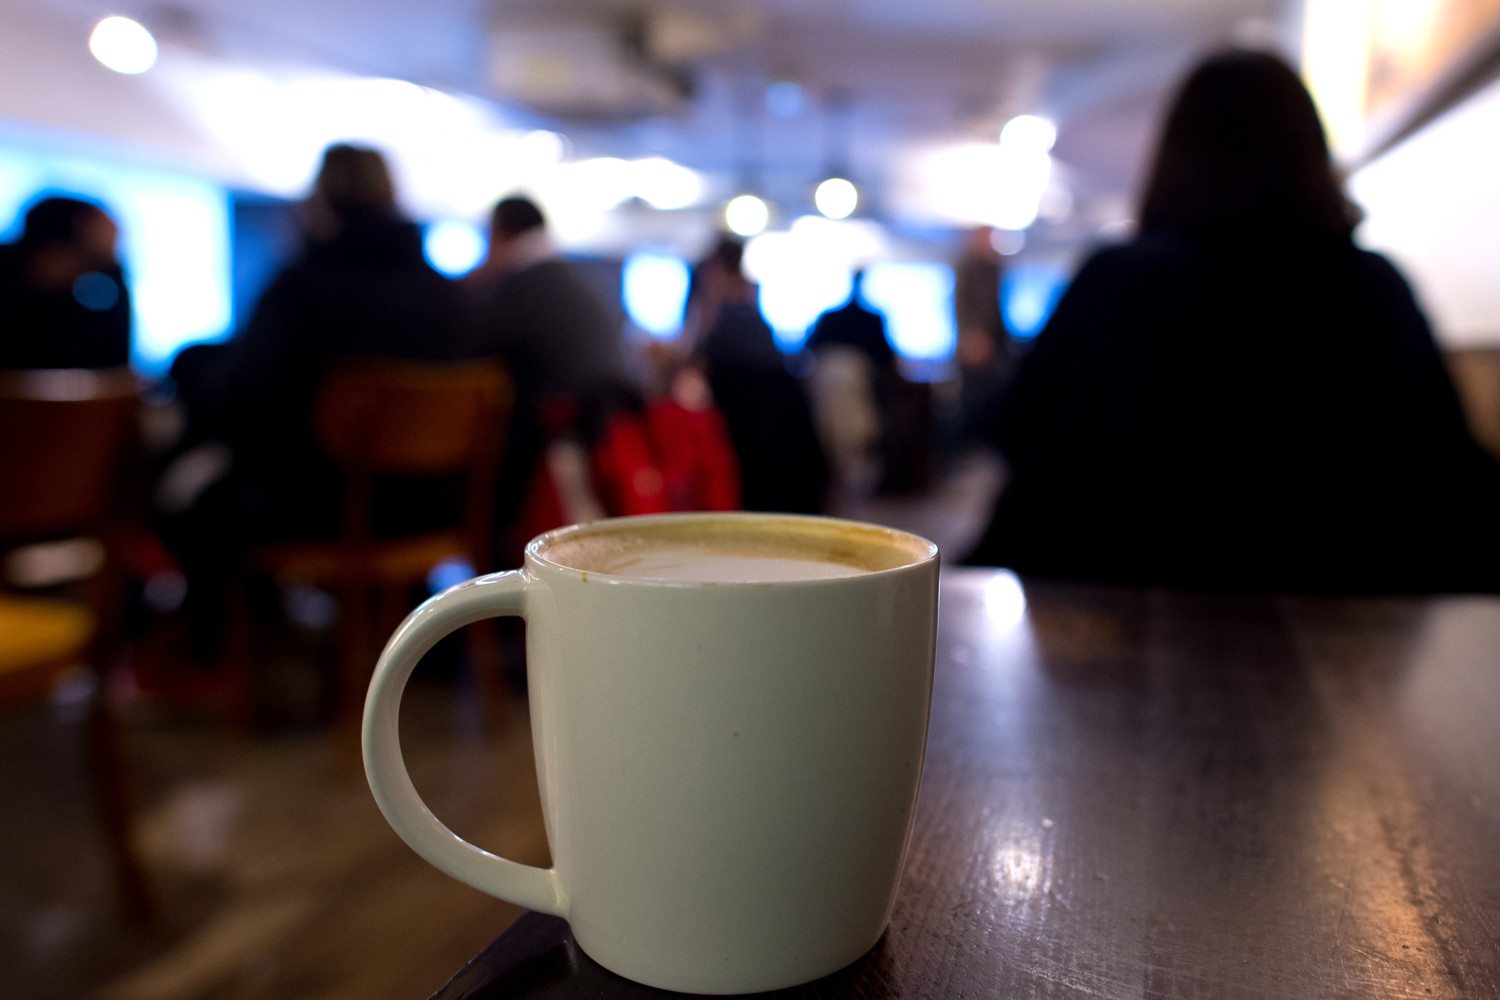 Coffee Shop Drinks Found To Contain Excessive Amounts Of Sugar